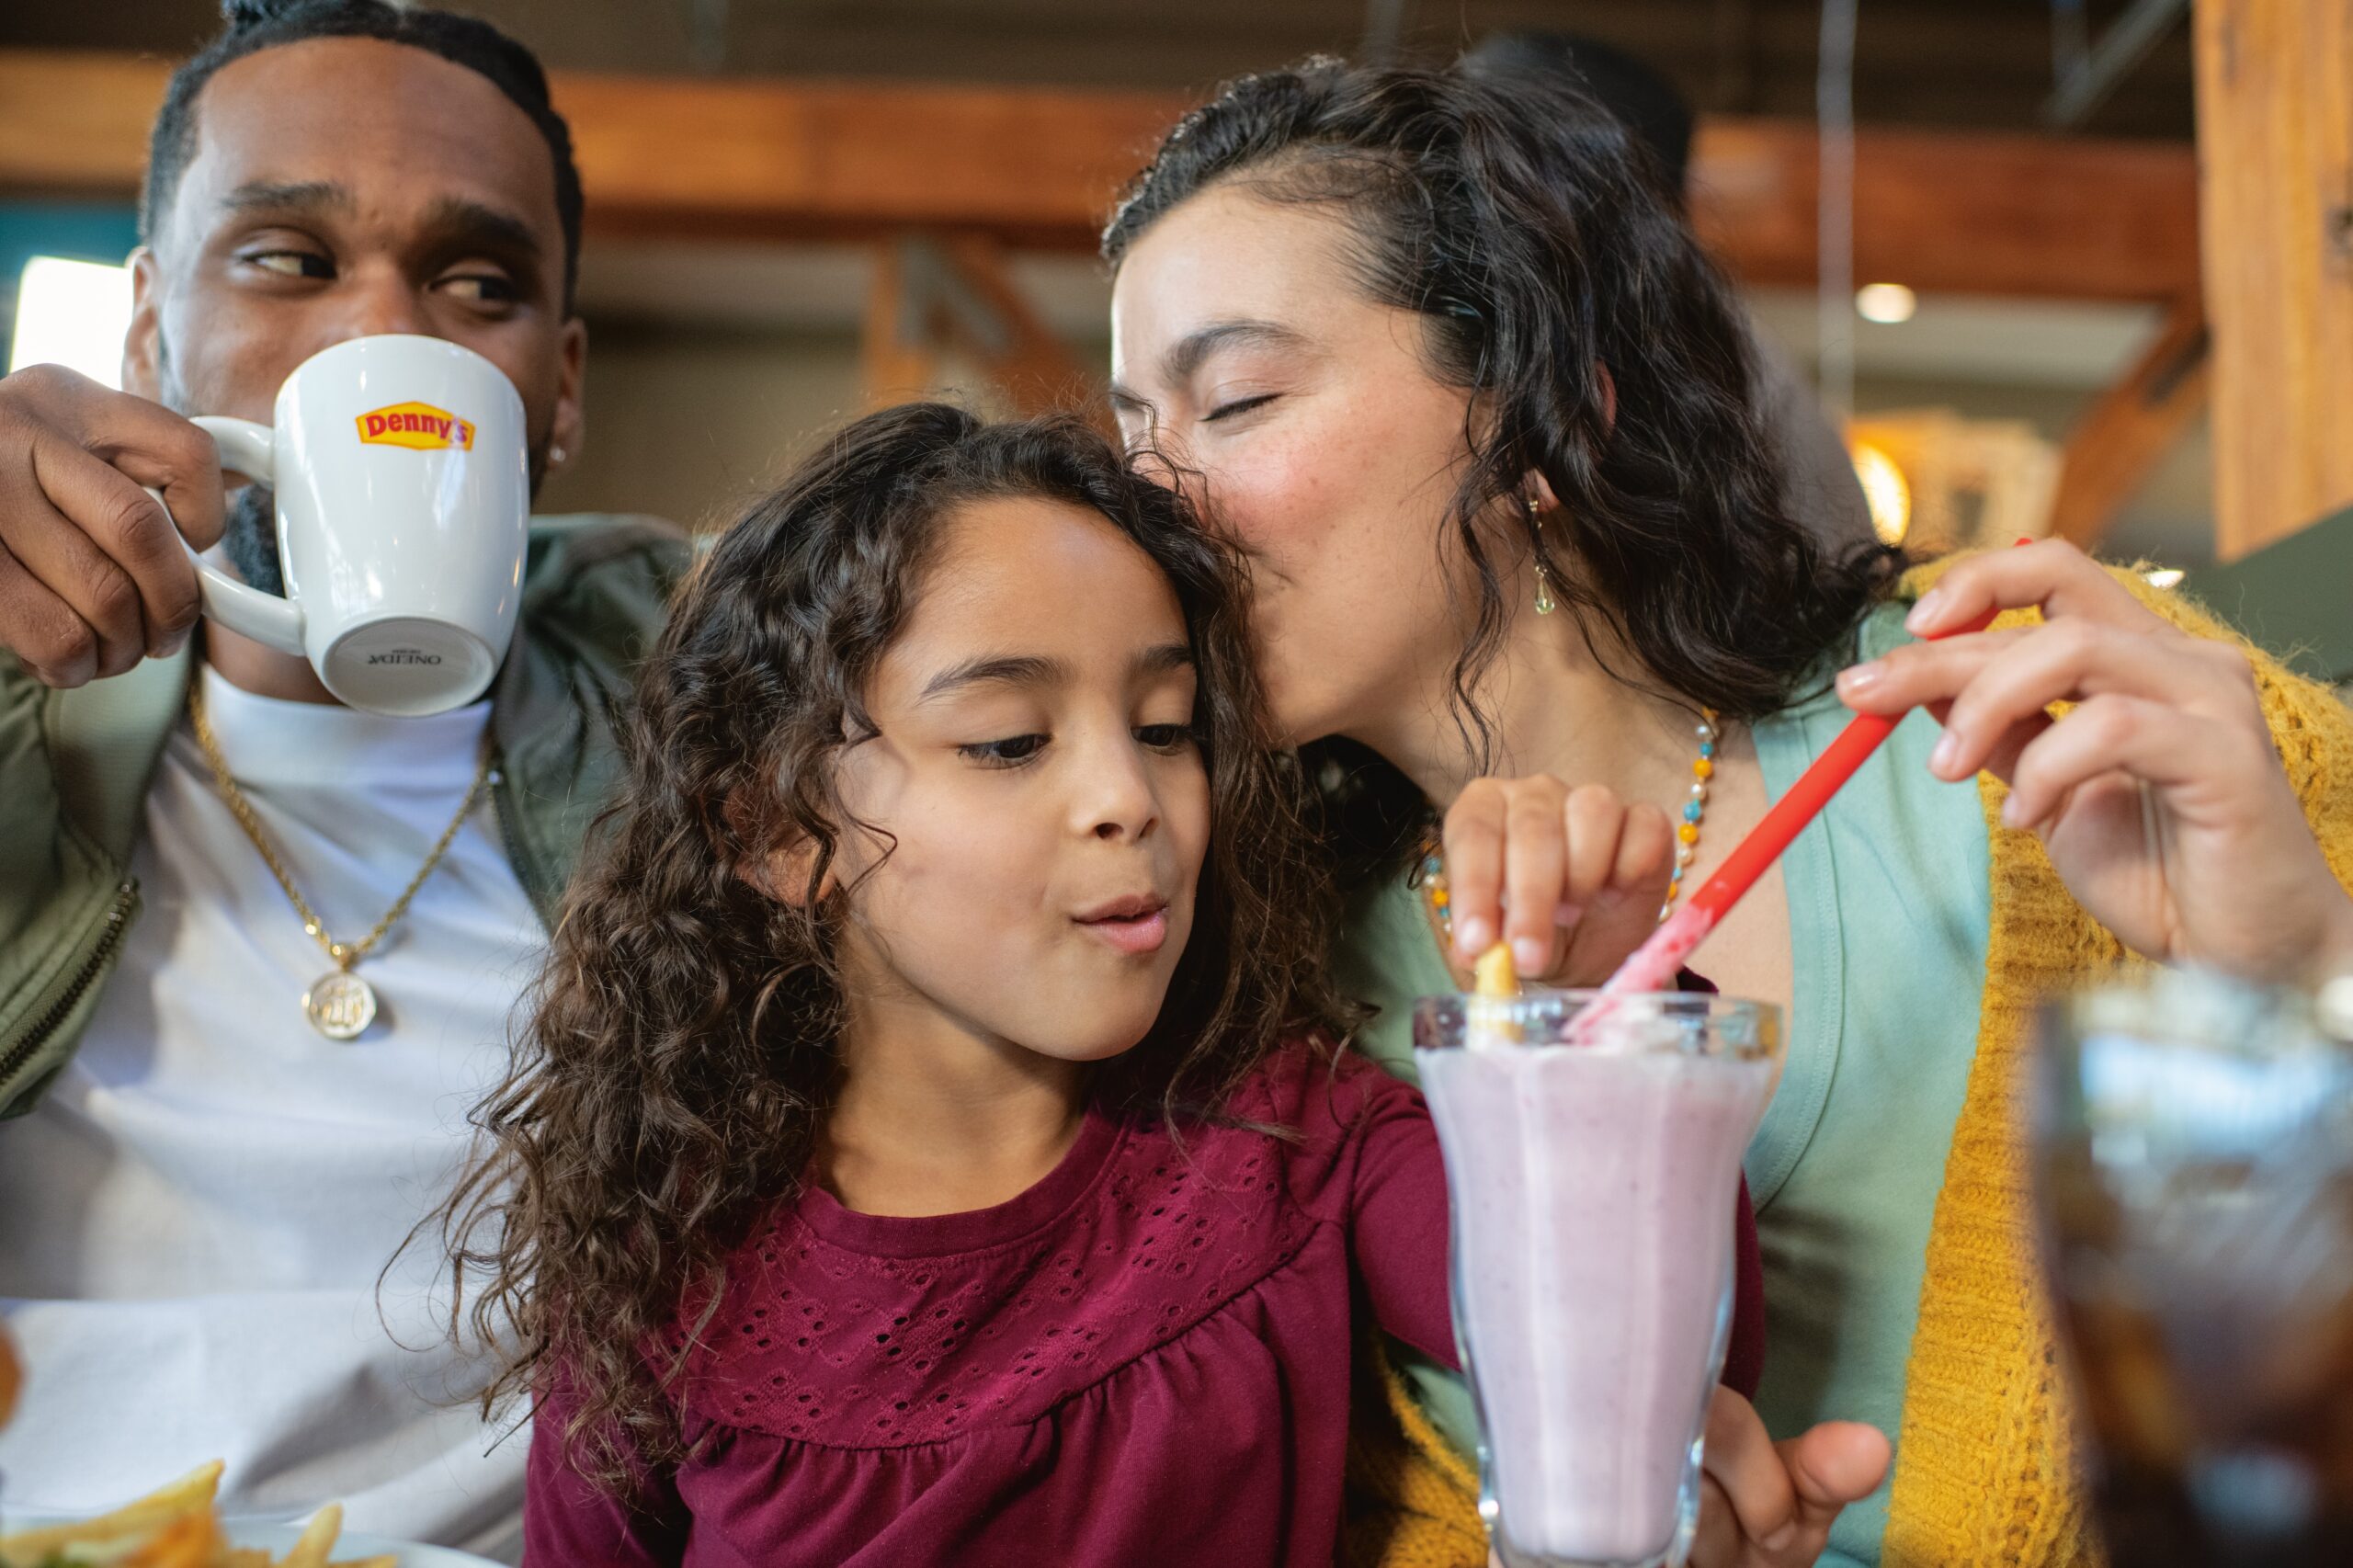 Denny’s Canada invites guests to enjoy a sweet treat in support of women’s health